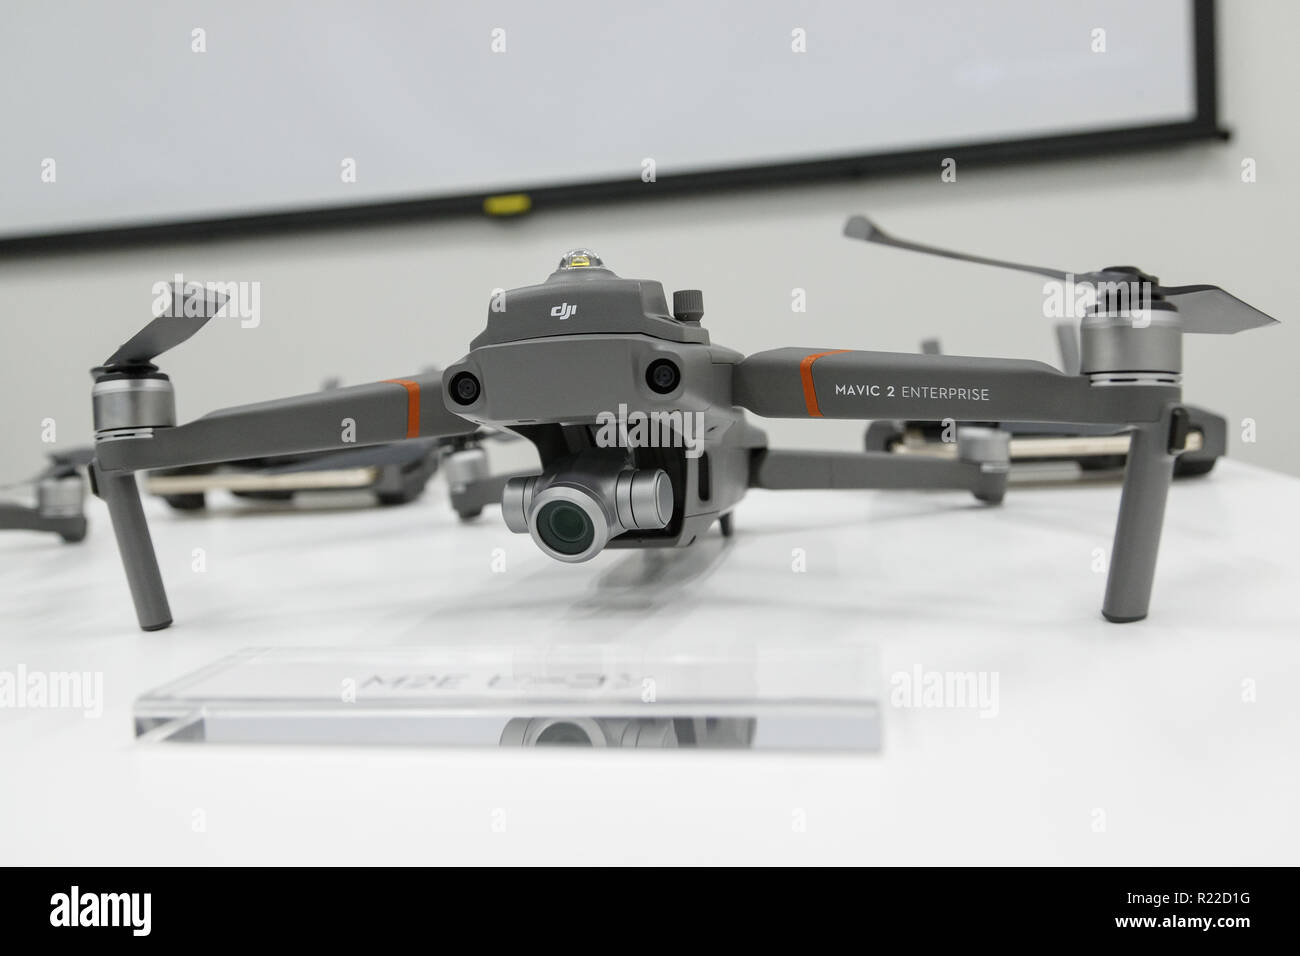 Tokyo, Japan. 15th Nov, 2018. A drone MAVIC 2 Enterprise with a M2E Beacon  on display during a media event at DJI Japan offices in Tokyo. DJI Japan  introduces accessories (M2E Speaker,